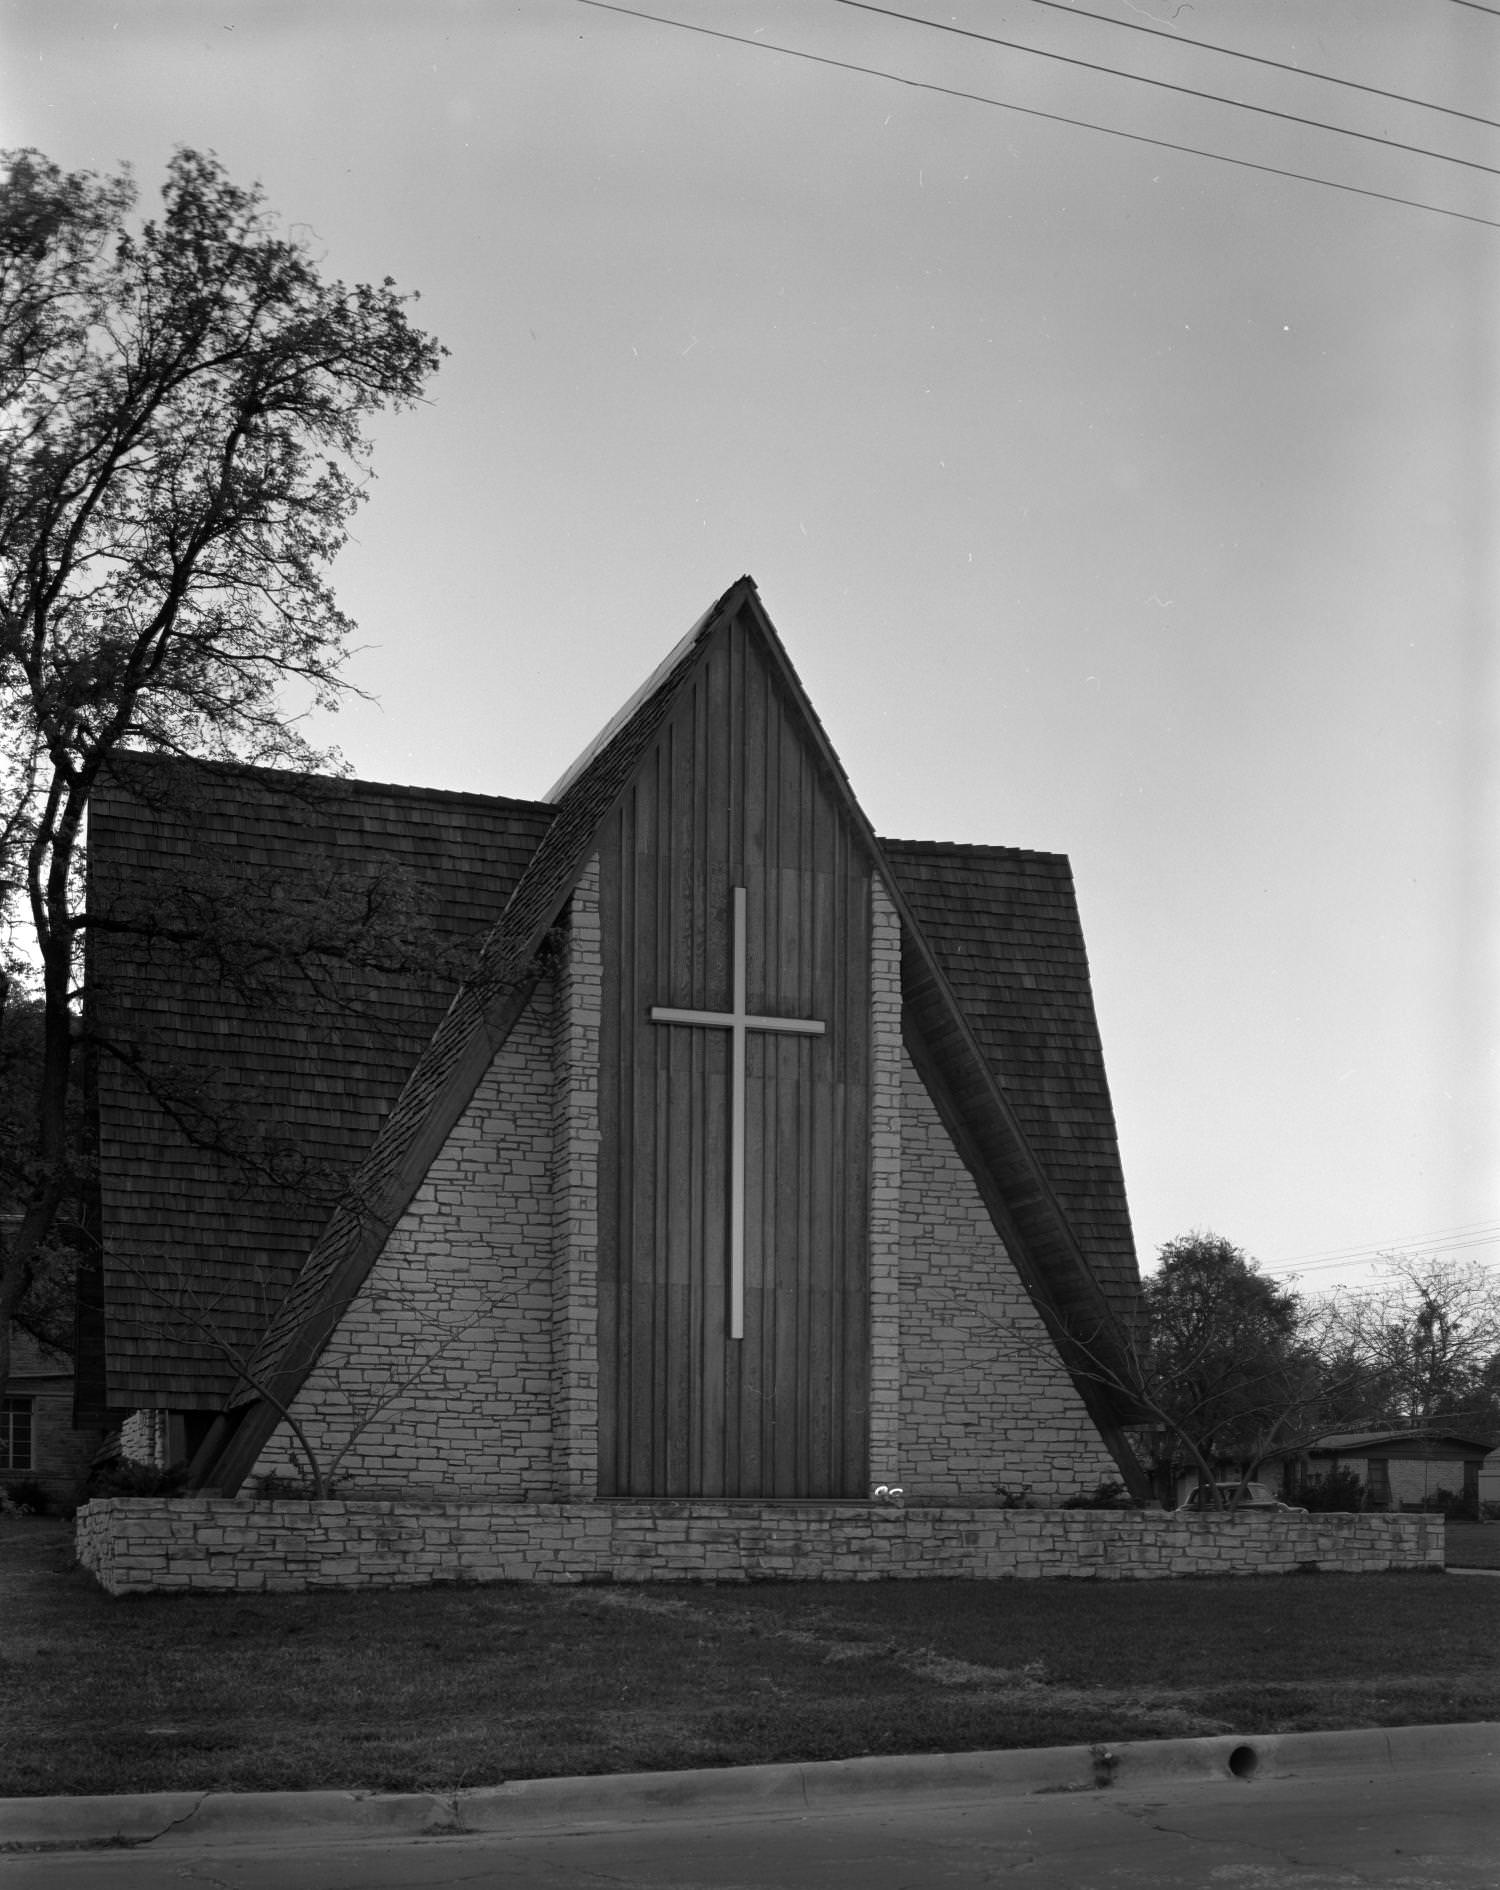 A church made from stone, with large, sloping roofs. On the building's front is a large cross, 1961